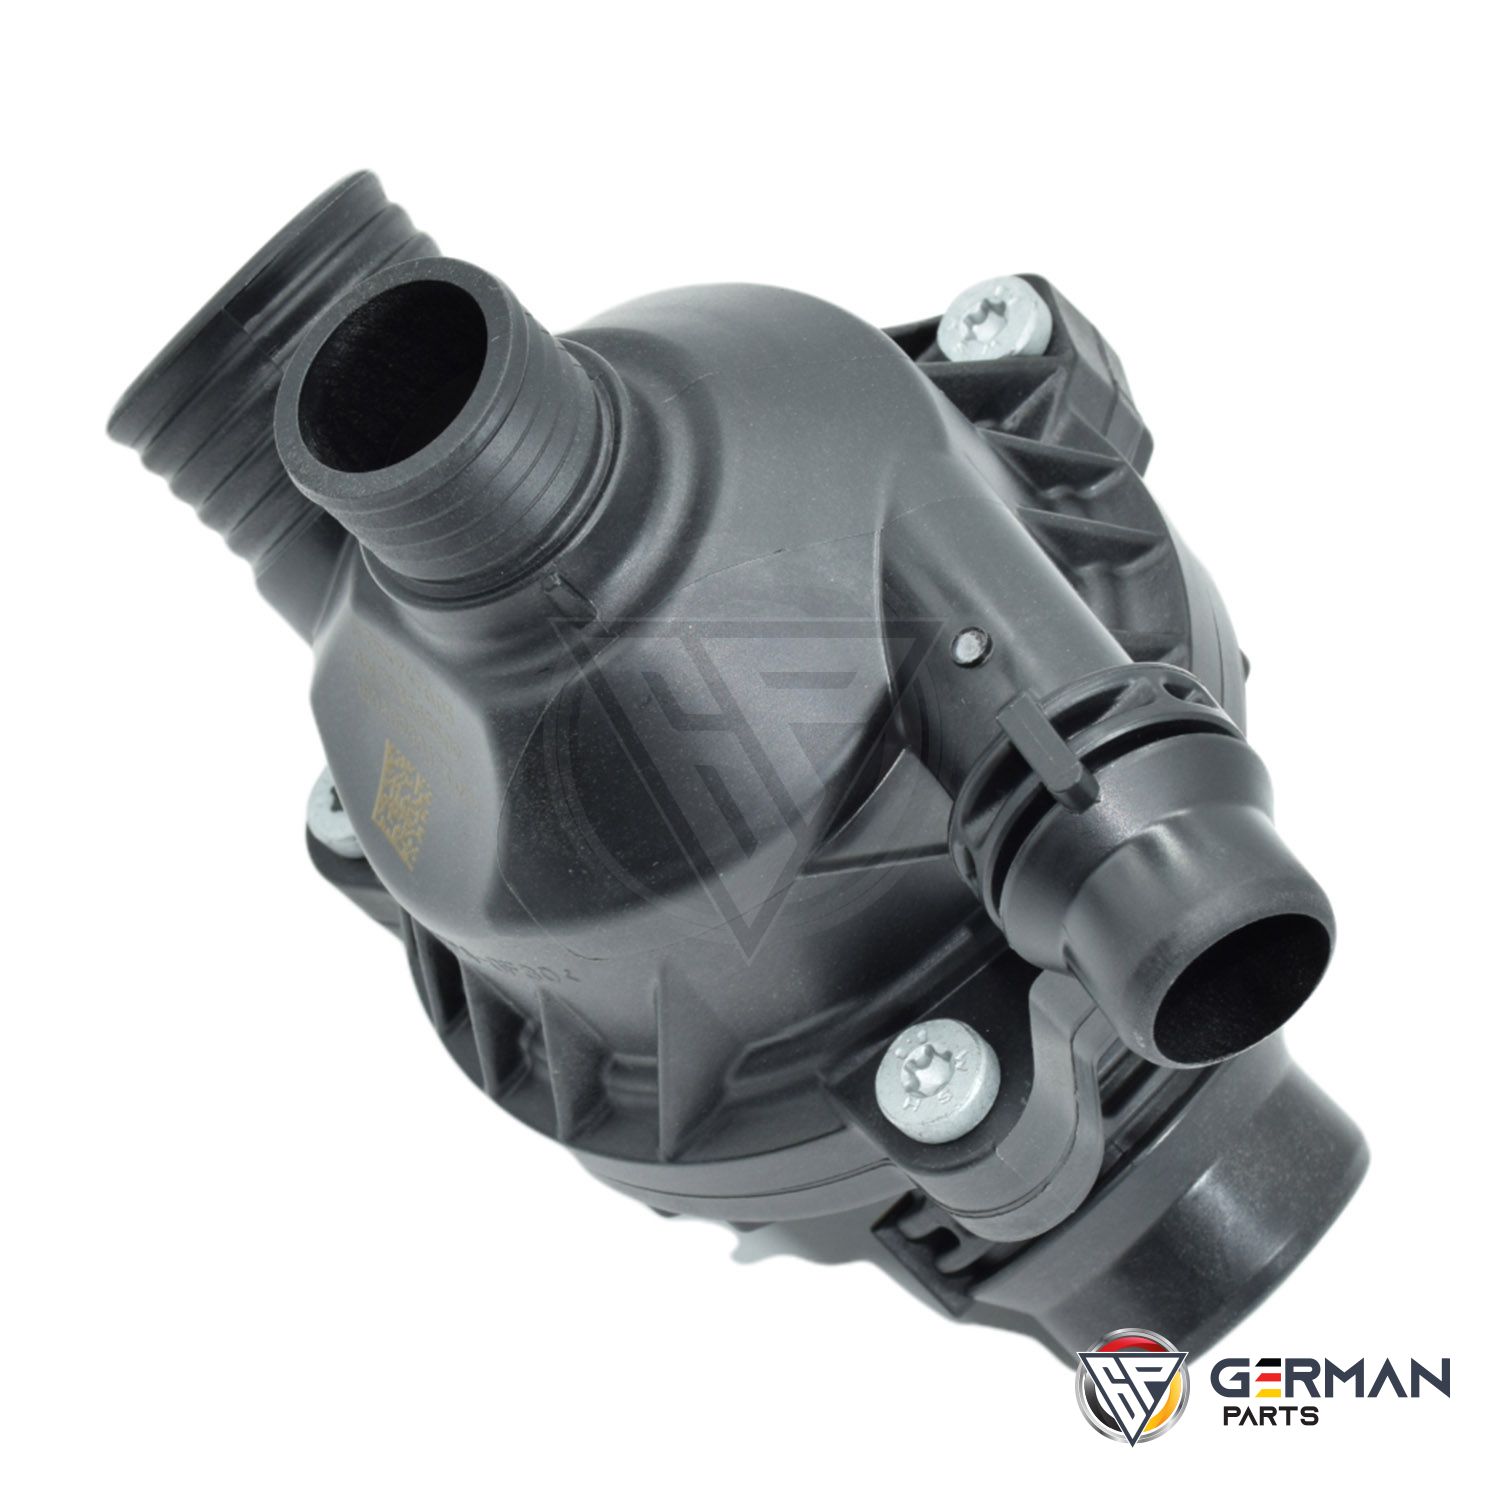 Buy BMW Thermostat Assembly 11537549476 - German Parts